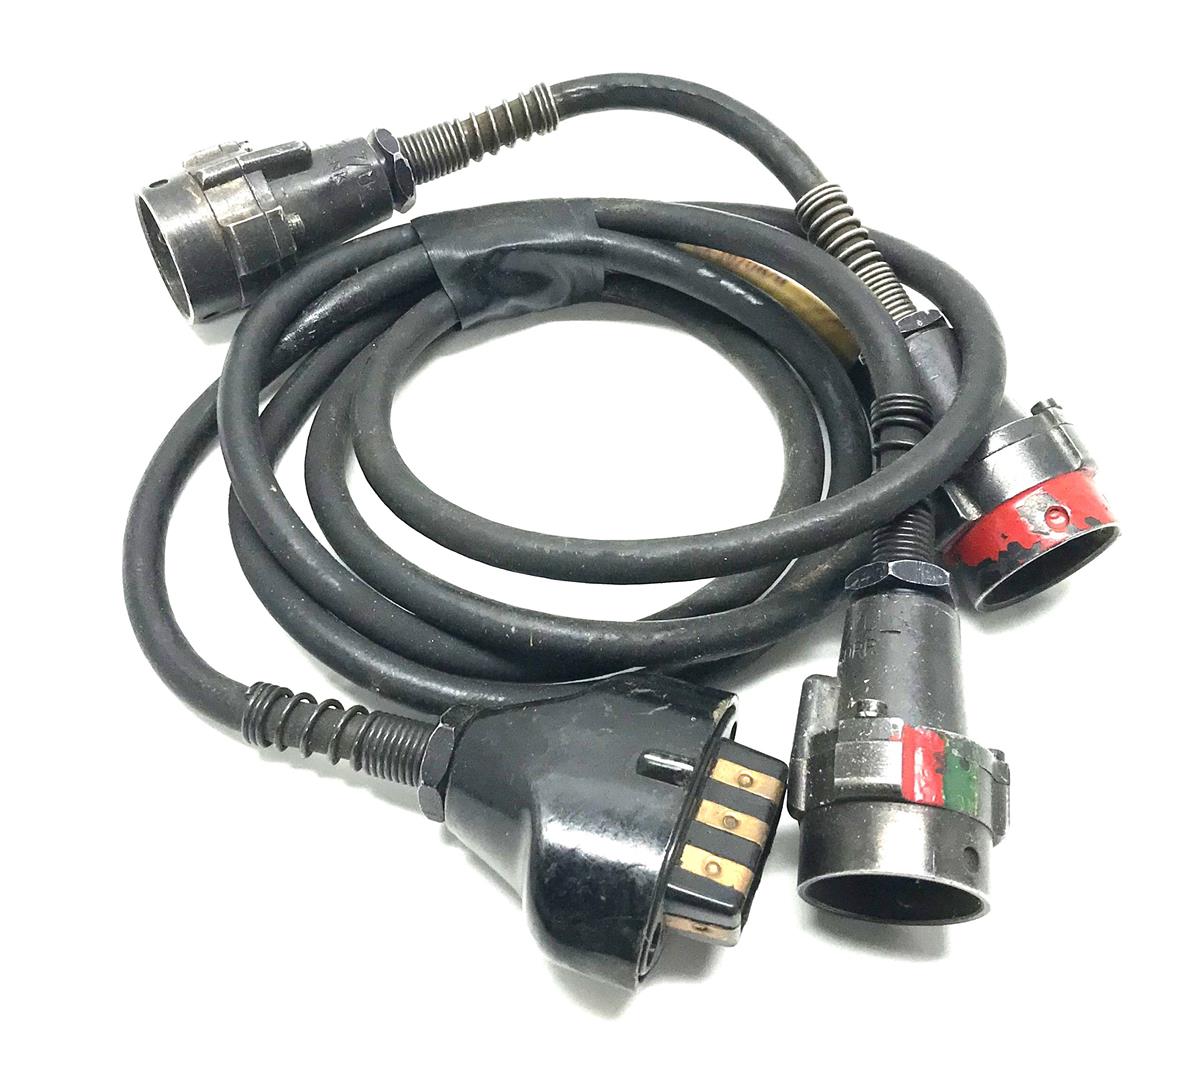 SP-2250 | SP-2250  ANGSA-6C Chest Set Group With Headset Microphone and Handset with U-77U Connector  (20).JPG